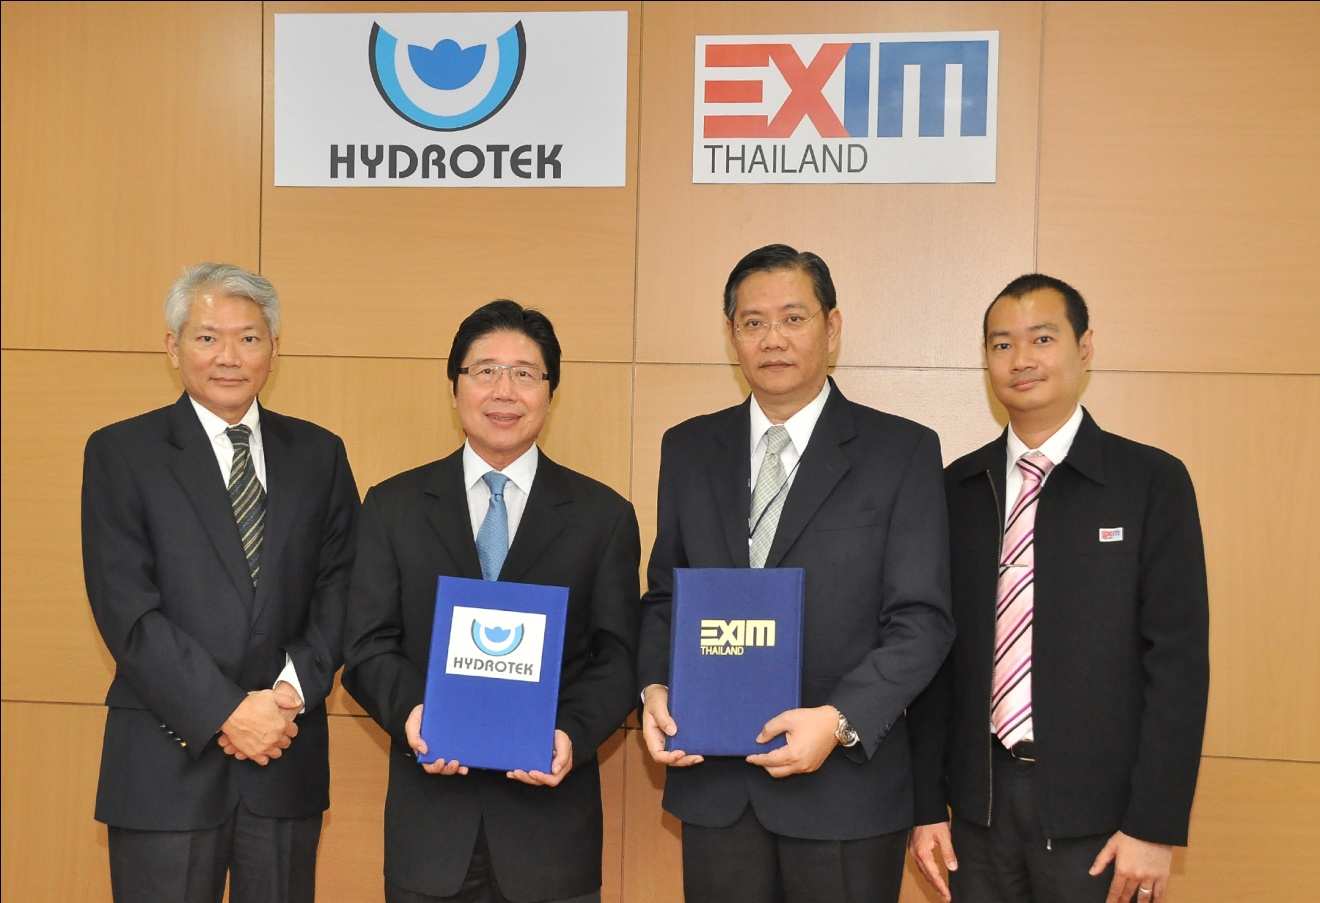 EXIM Thailand Lends to Hydrotek in Support of Thai Environmental Engineering SME to Expand into Neighboring Countries